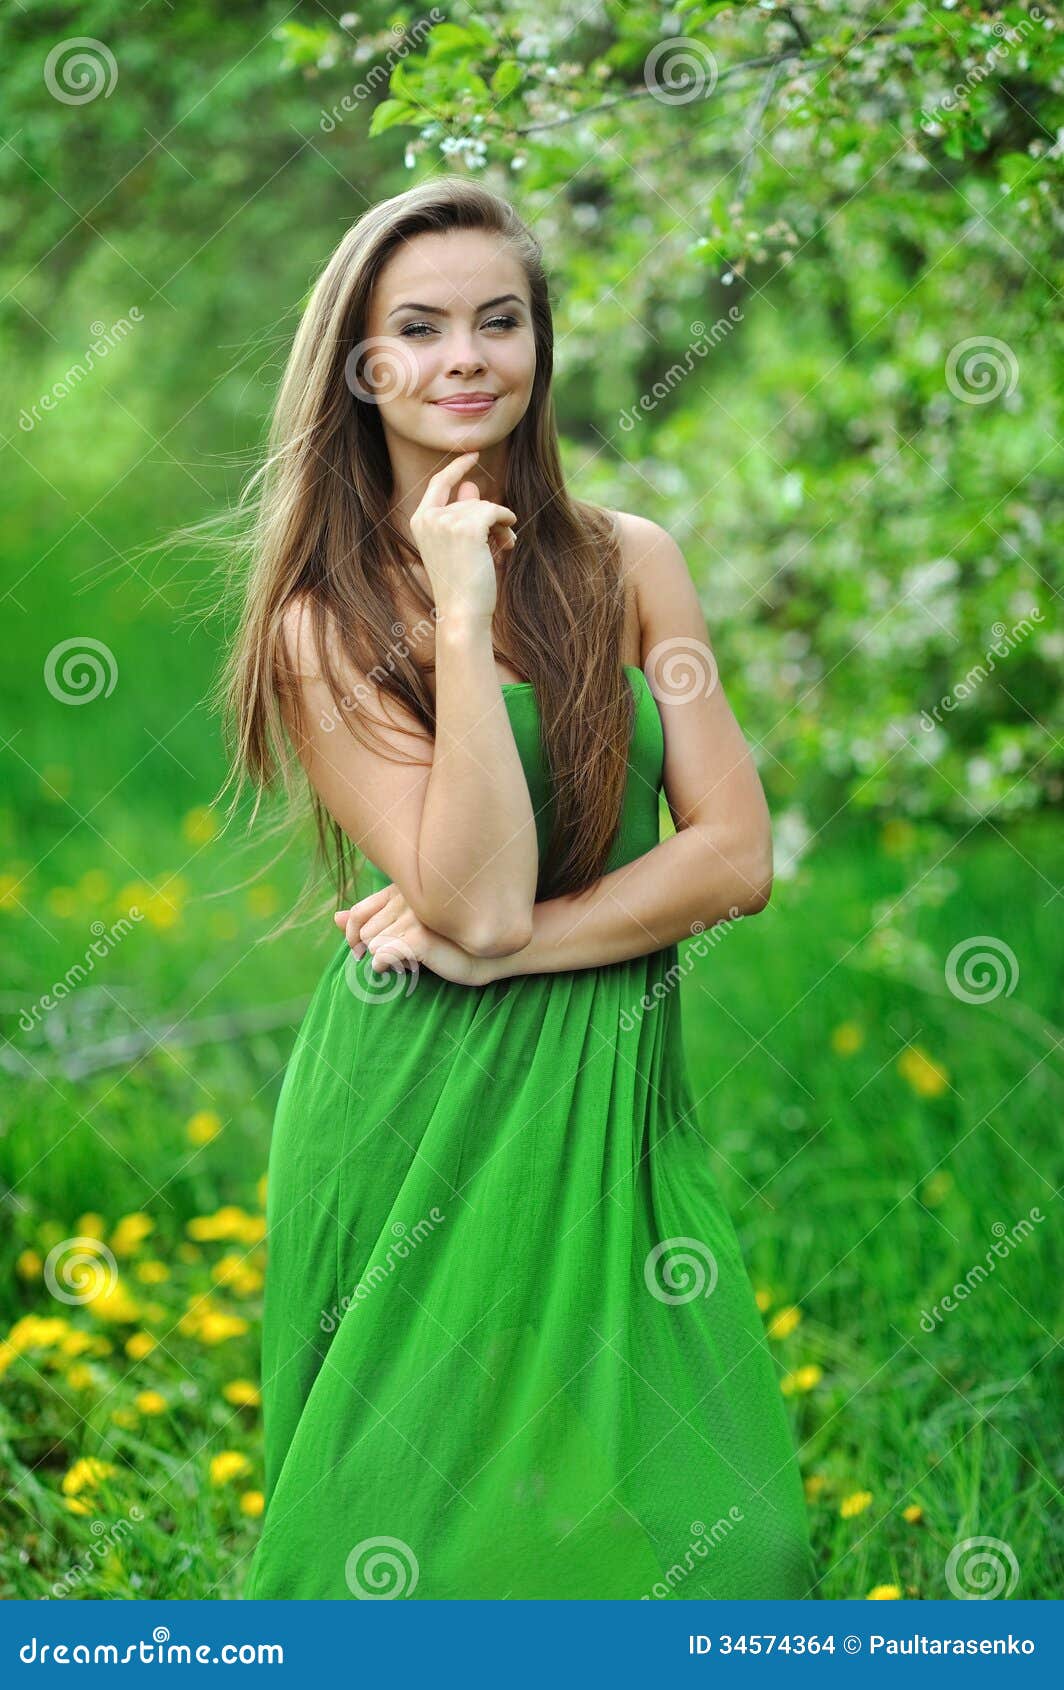 Young Beautiful Girl In The Park Stock Photo - Image of female, outdoor ...